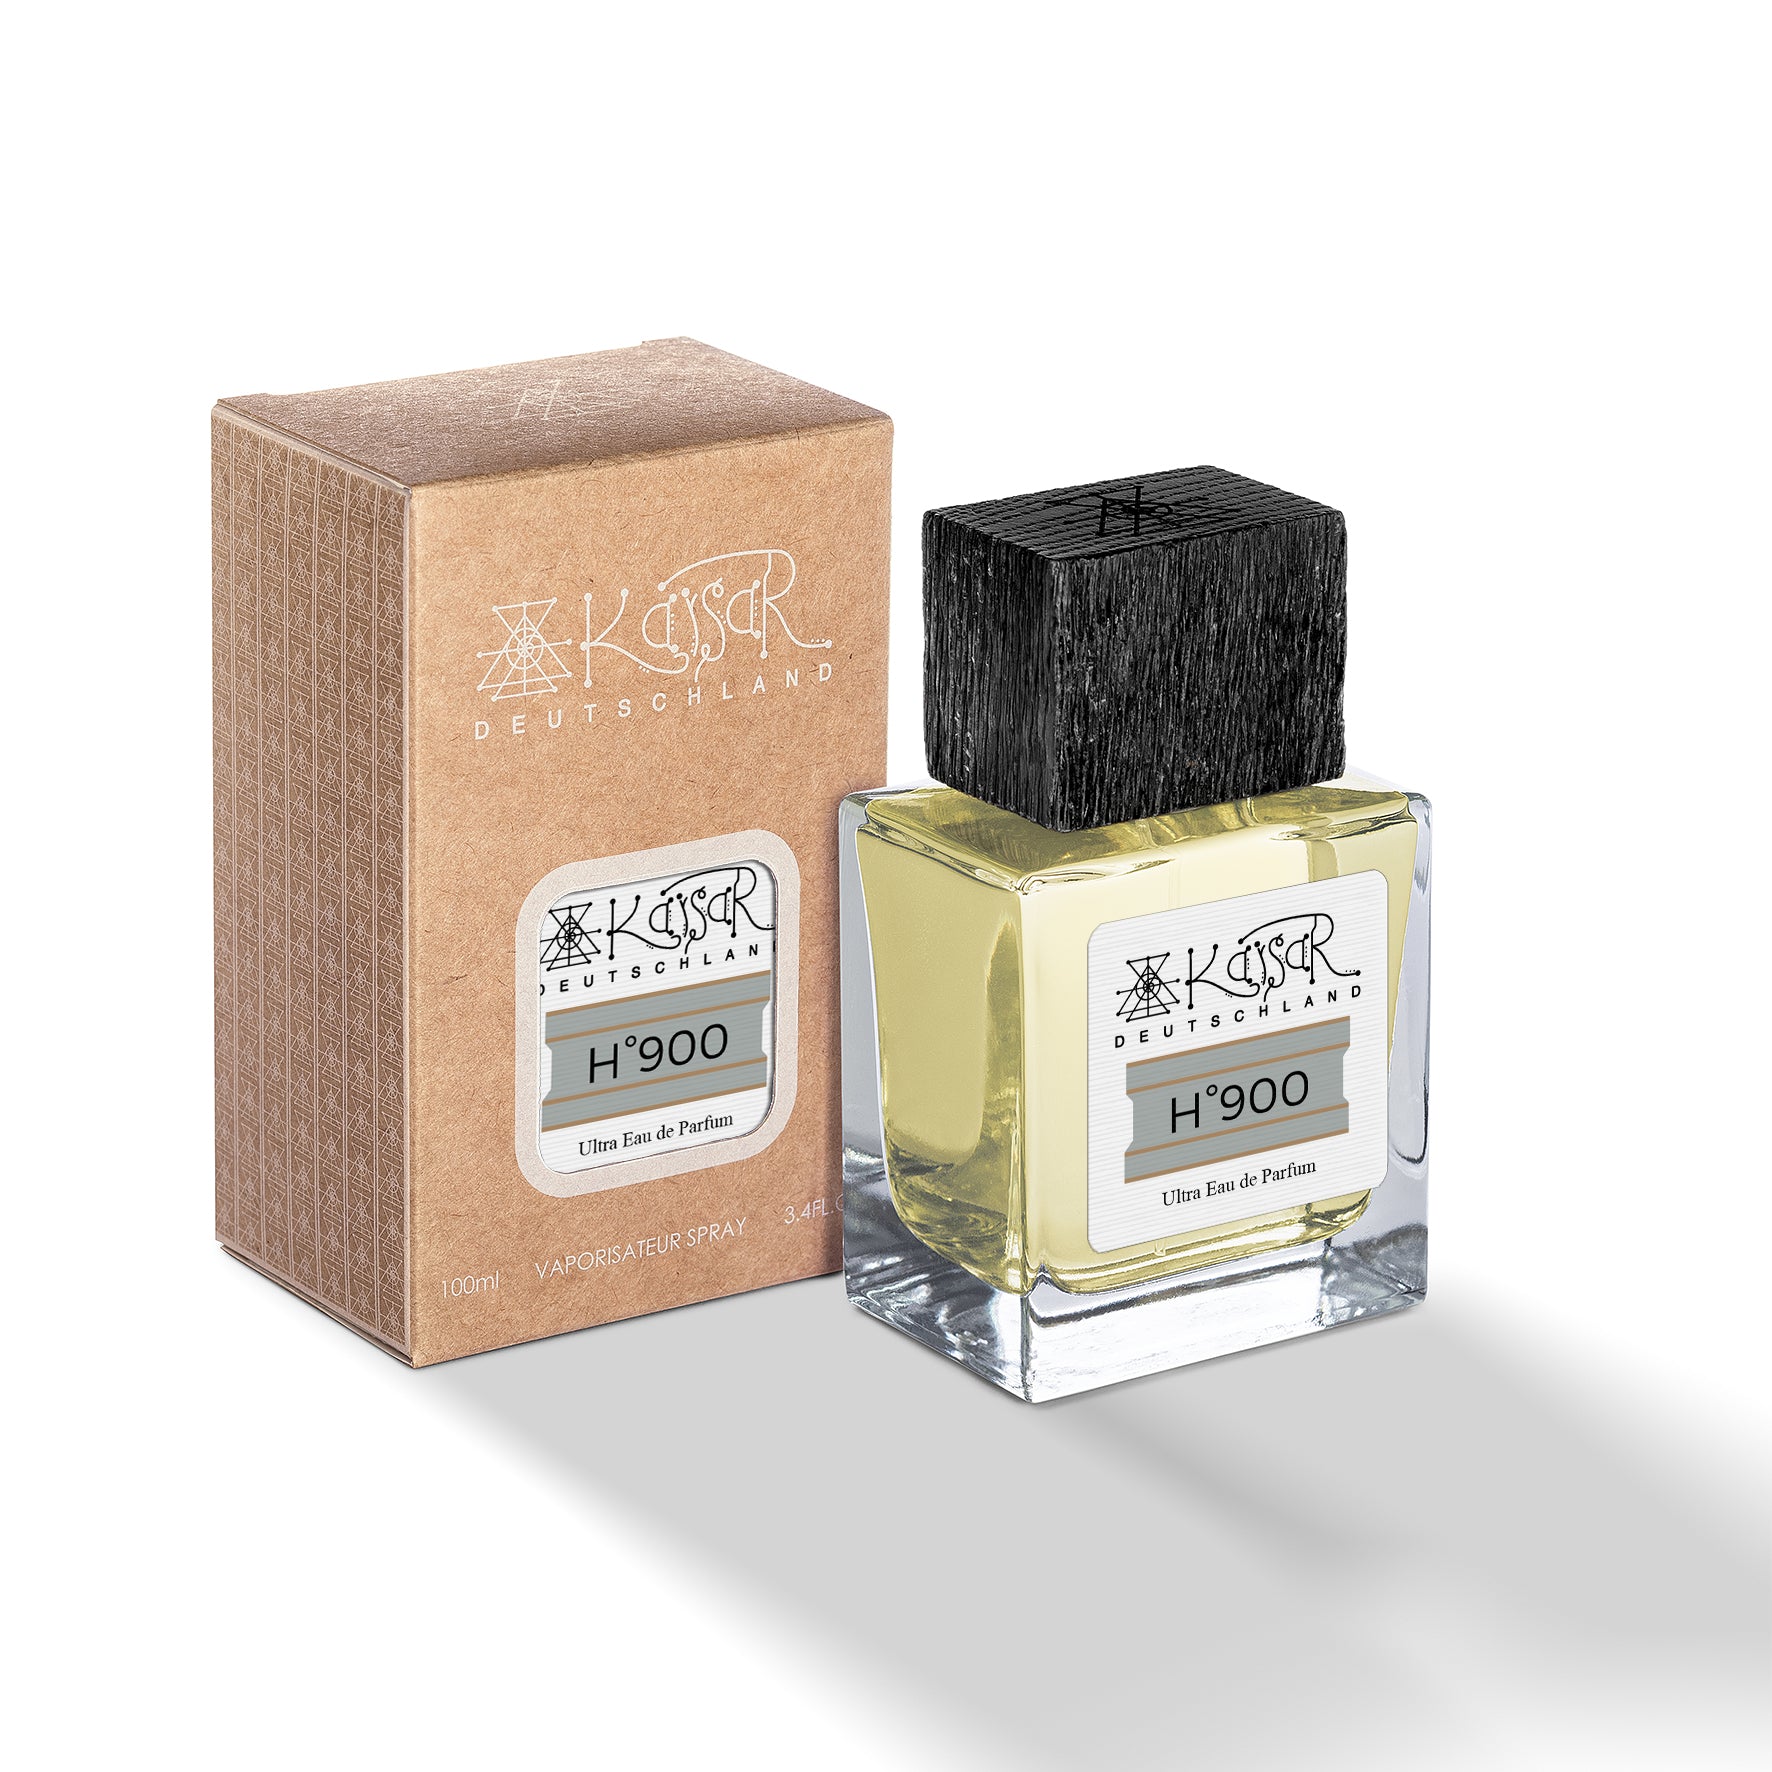 H°900 One Man Show Scent